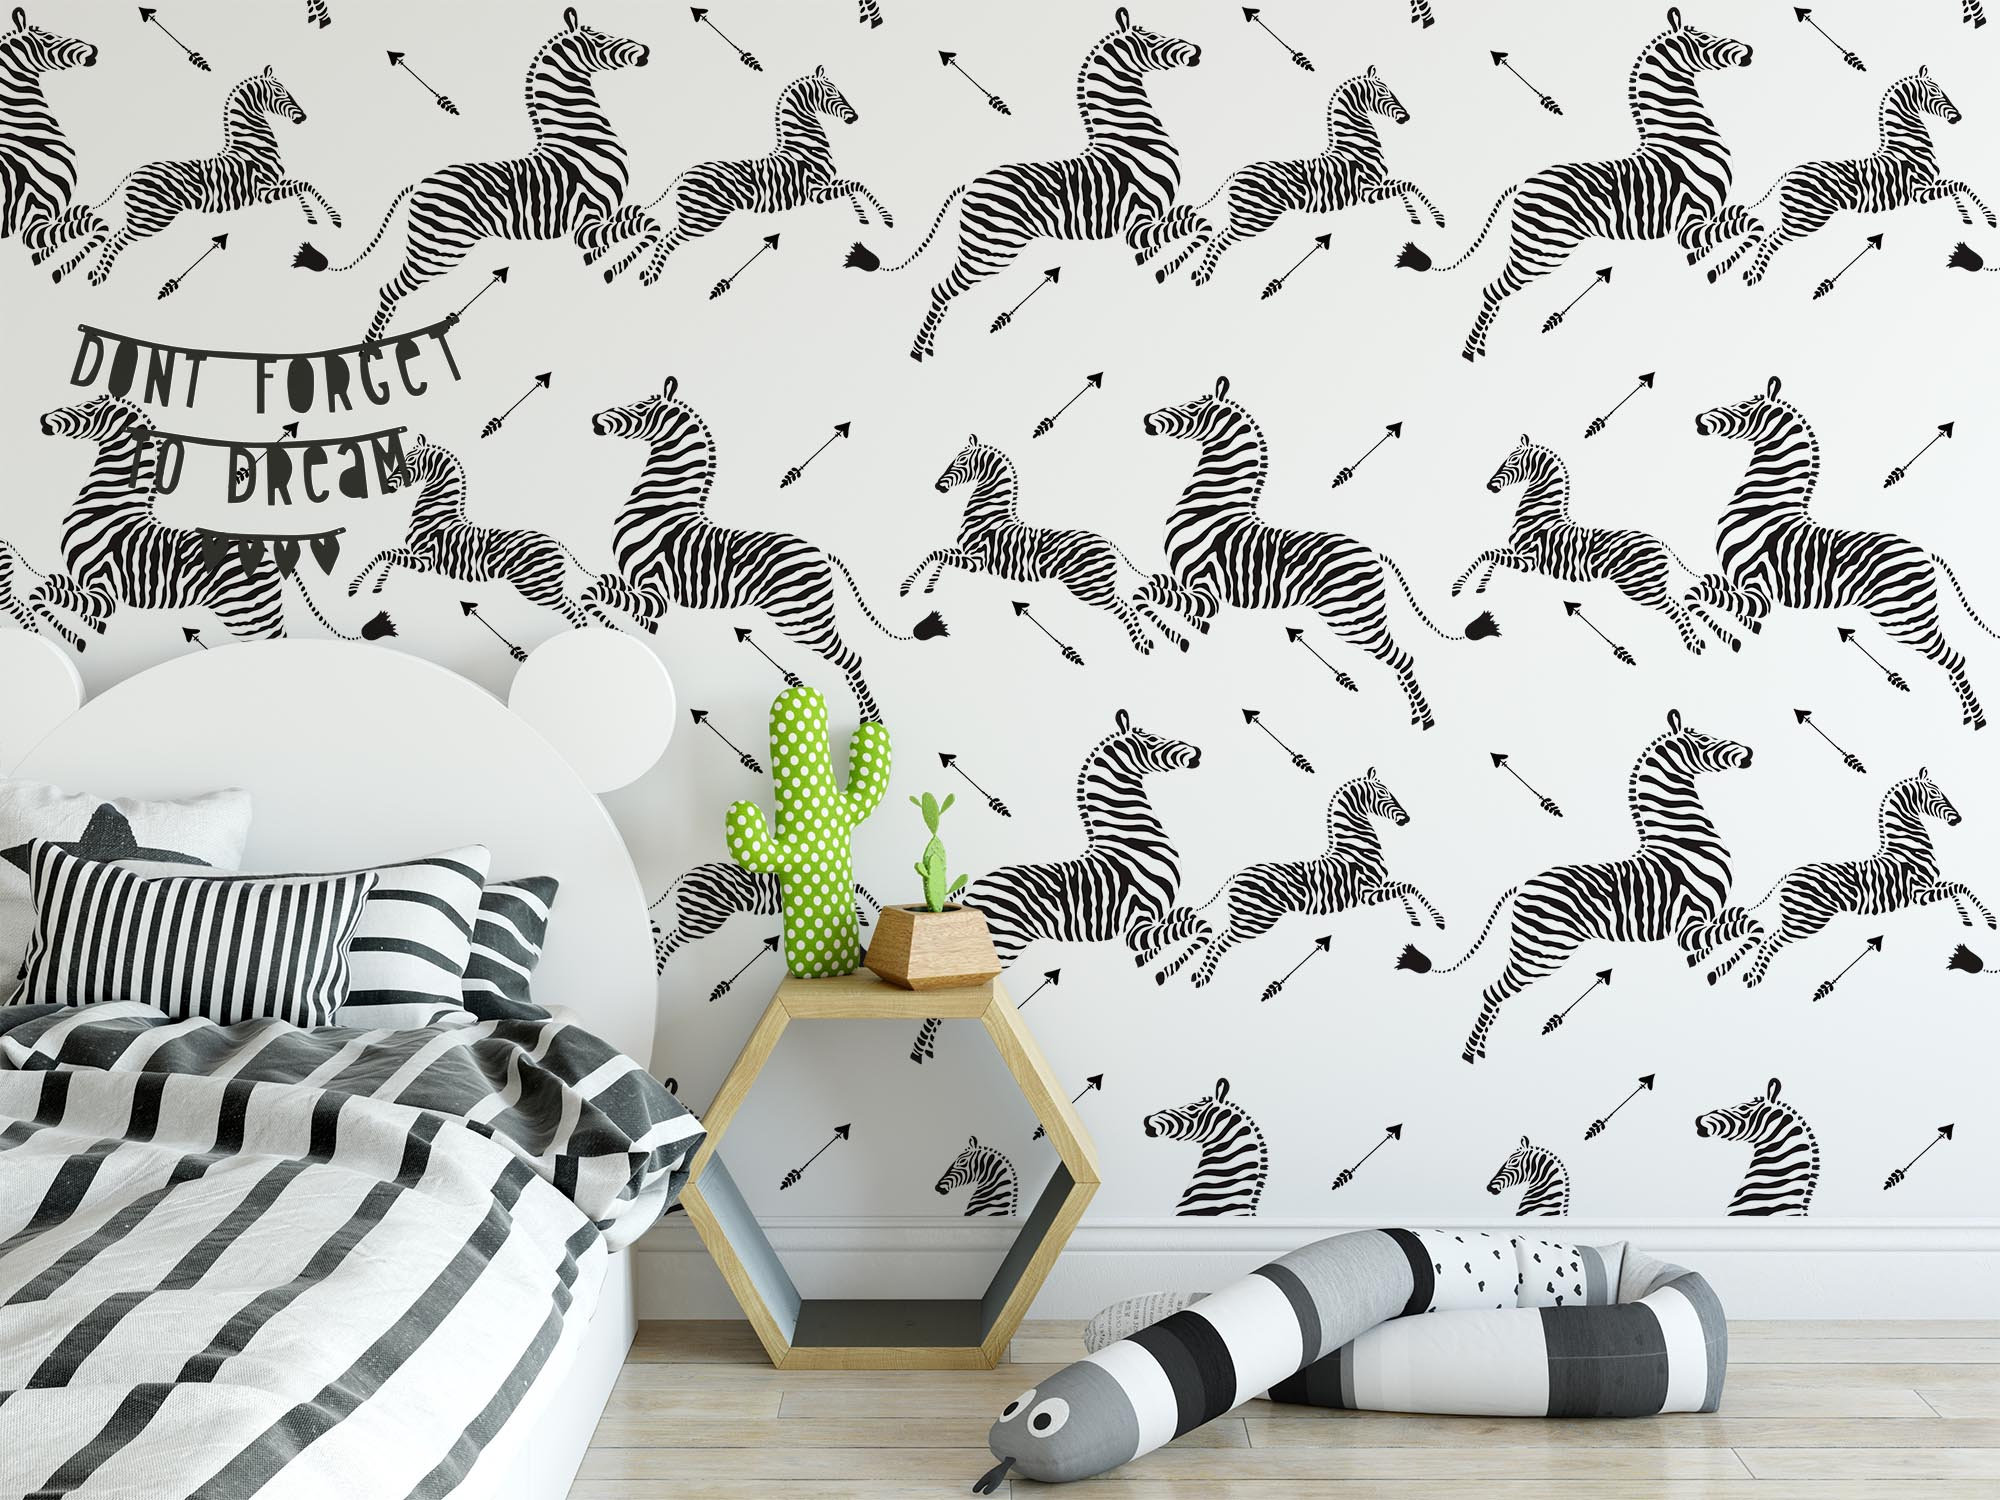  Zebra Removable Wall Mural Animal Self-Adhesive Large Wallpaper  Black and White for Walls Living Room Bedroom TV Background Kids Girls  Rooms Decoration 157x110 Inch : Tools & Home Improvement